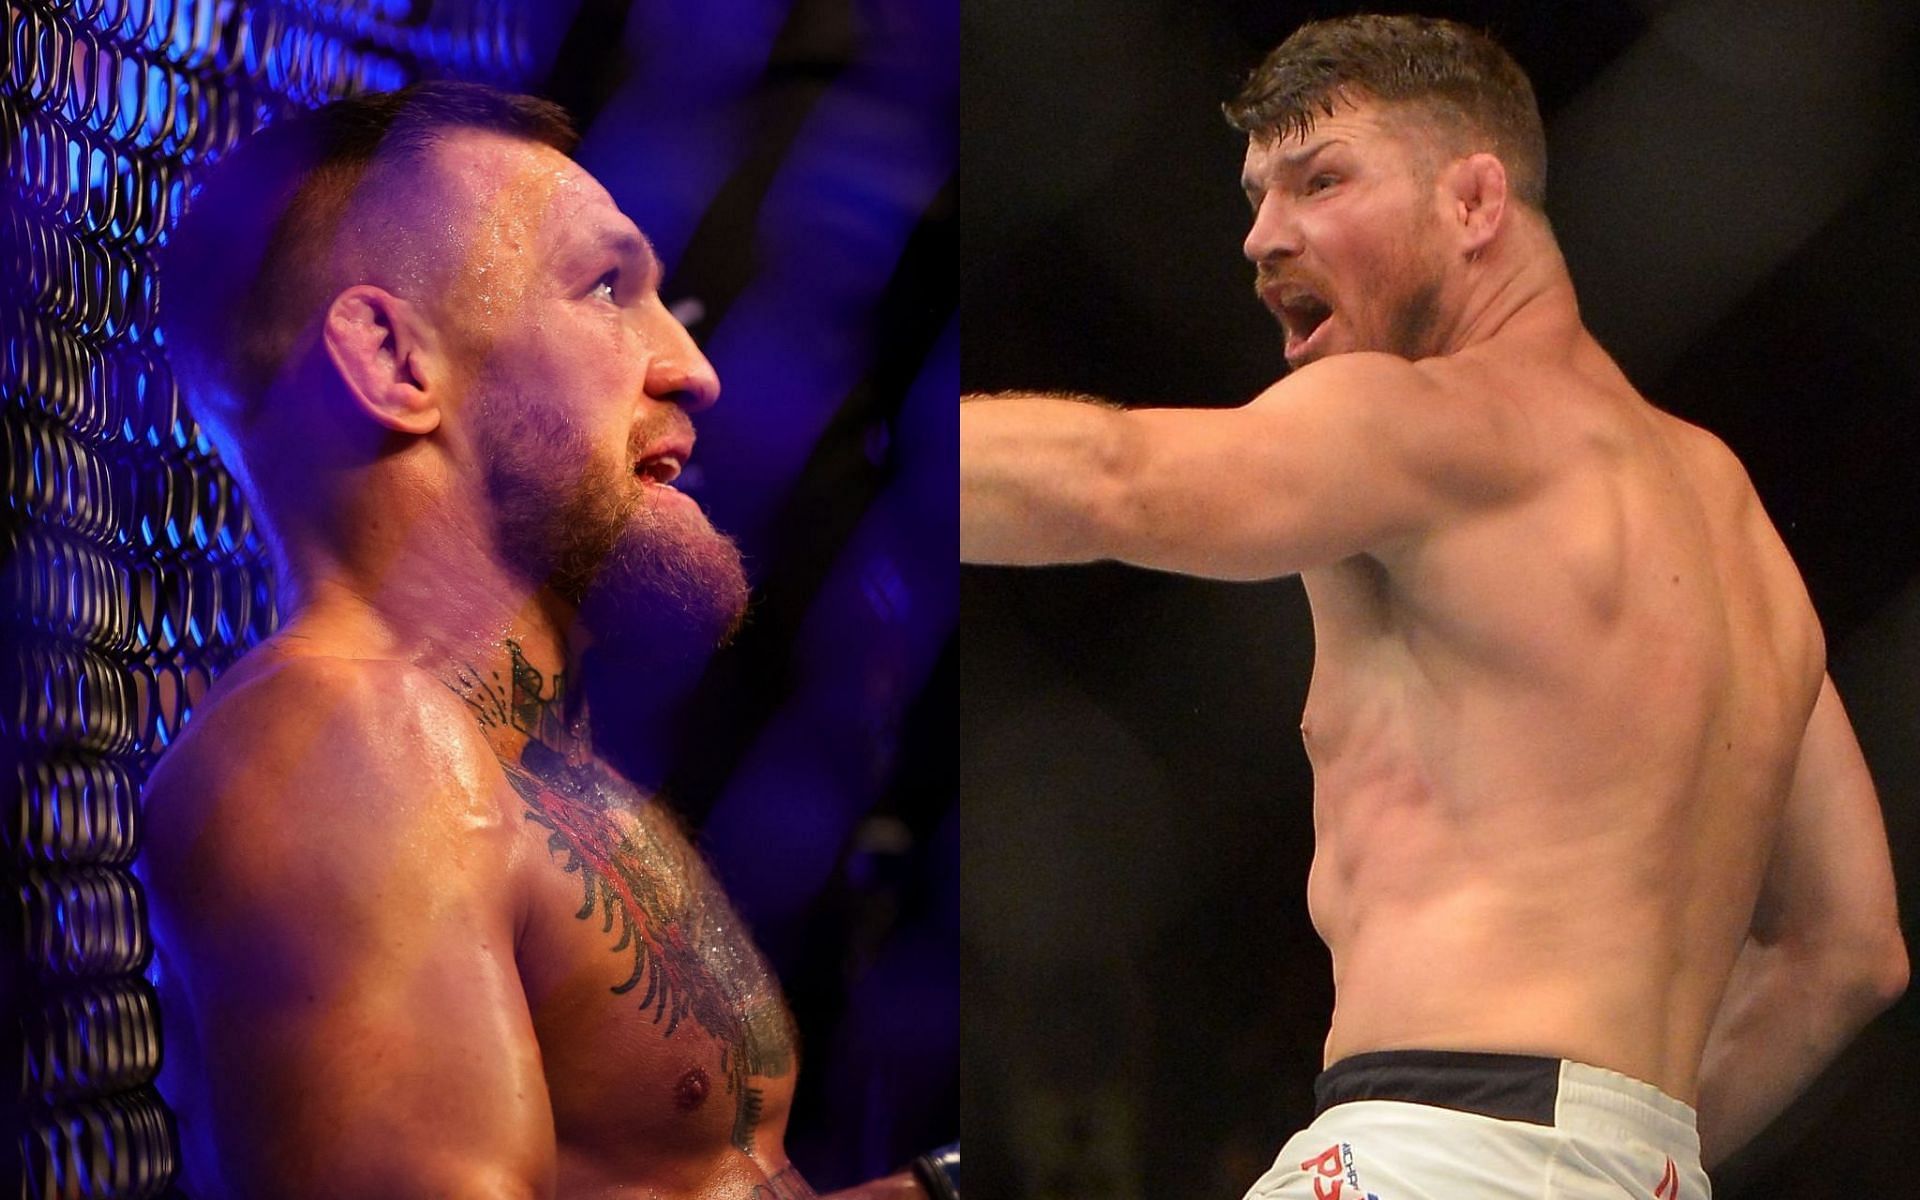 Conor McGregor (left) &amp; Michael Bisping (right)